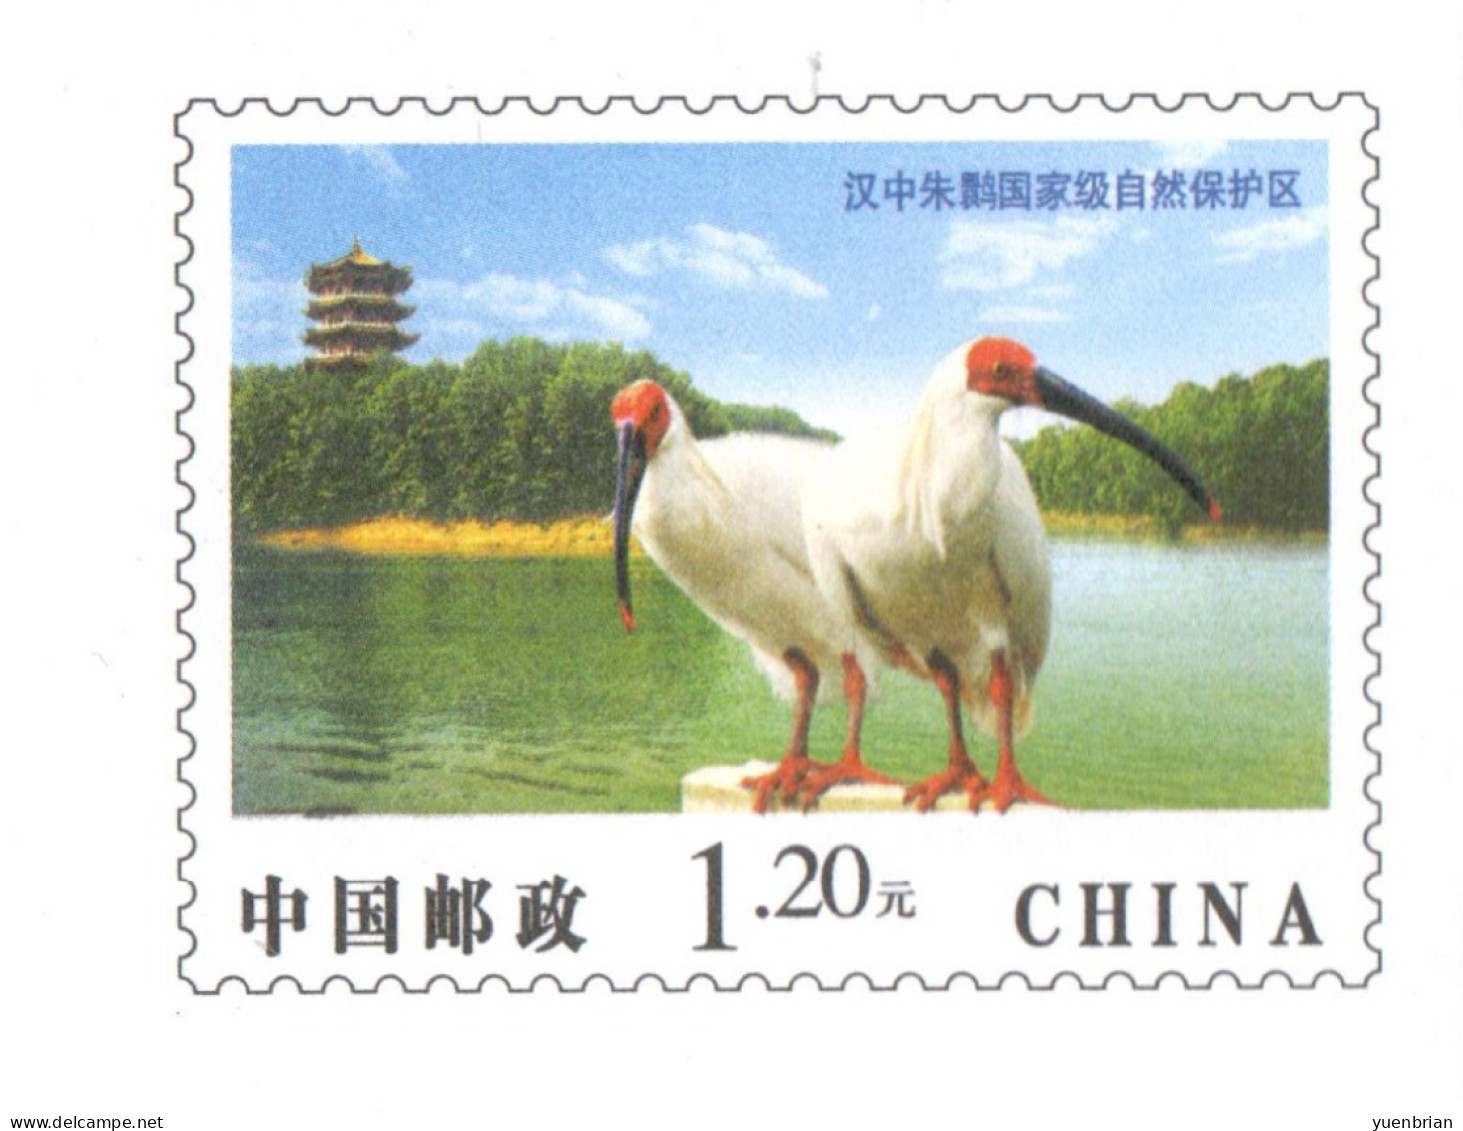 China 2009, Postal Stationary, Pre-Stamped Cover $1.20, Crane, MNH** - Cranes And Other Gruiformes